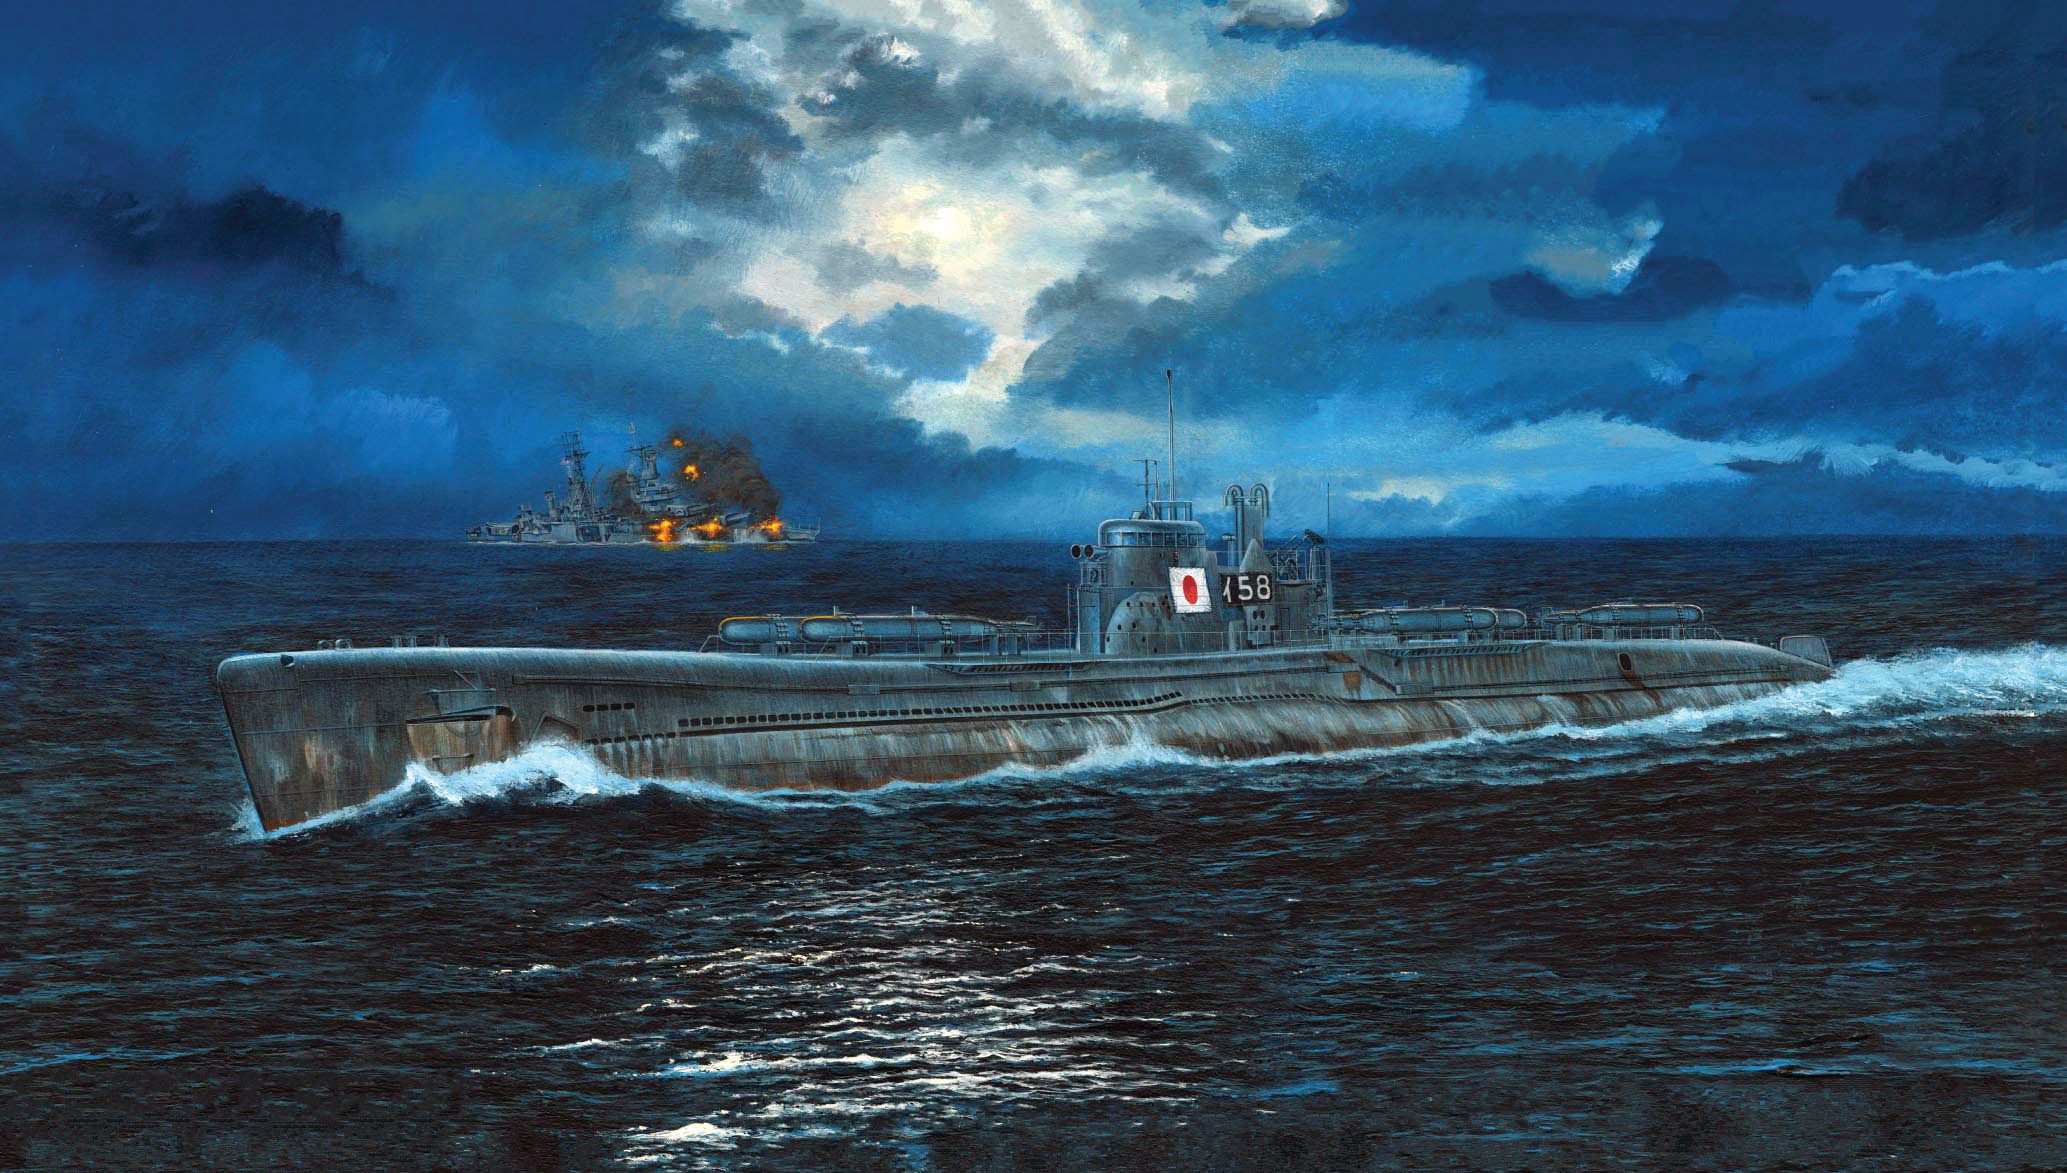 This artist’s impression of the sinking of Indianapolis shows the warship engulfed in flames in the distance with Japanese submarine I-58 on the surface in the foreground. The cruiser sank within minutes of being struck by a torpedo.